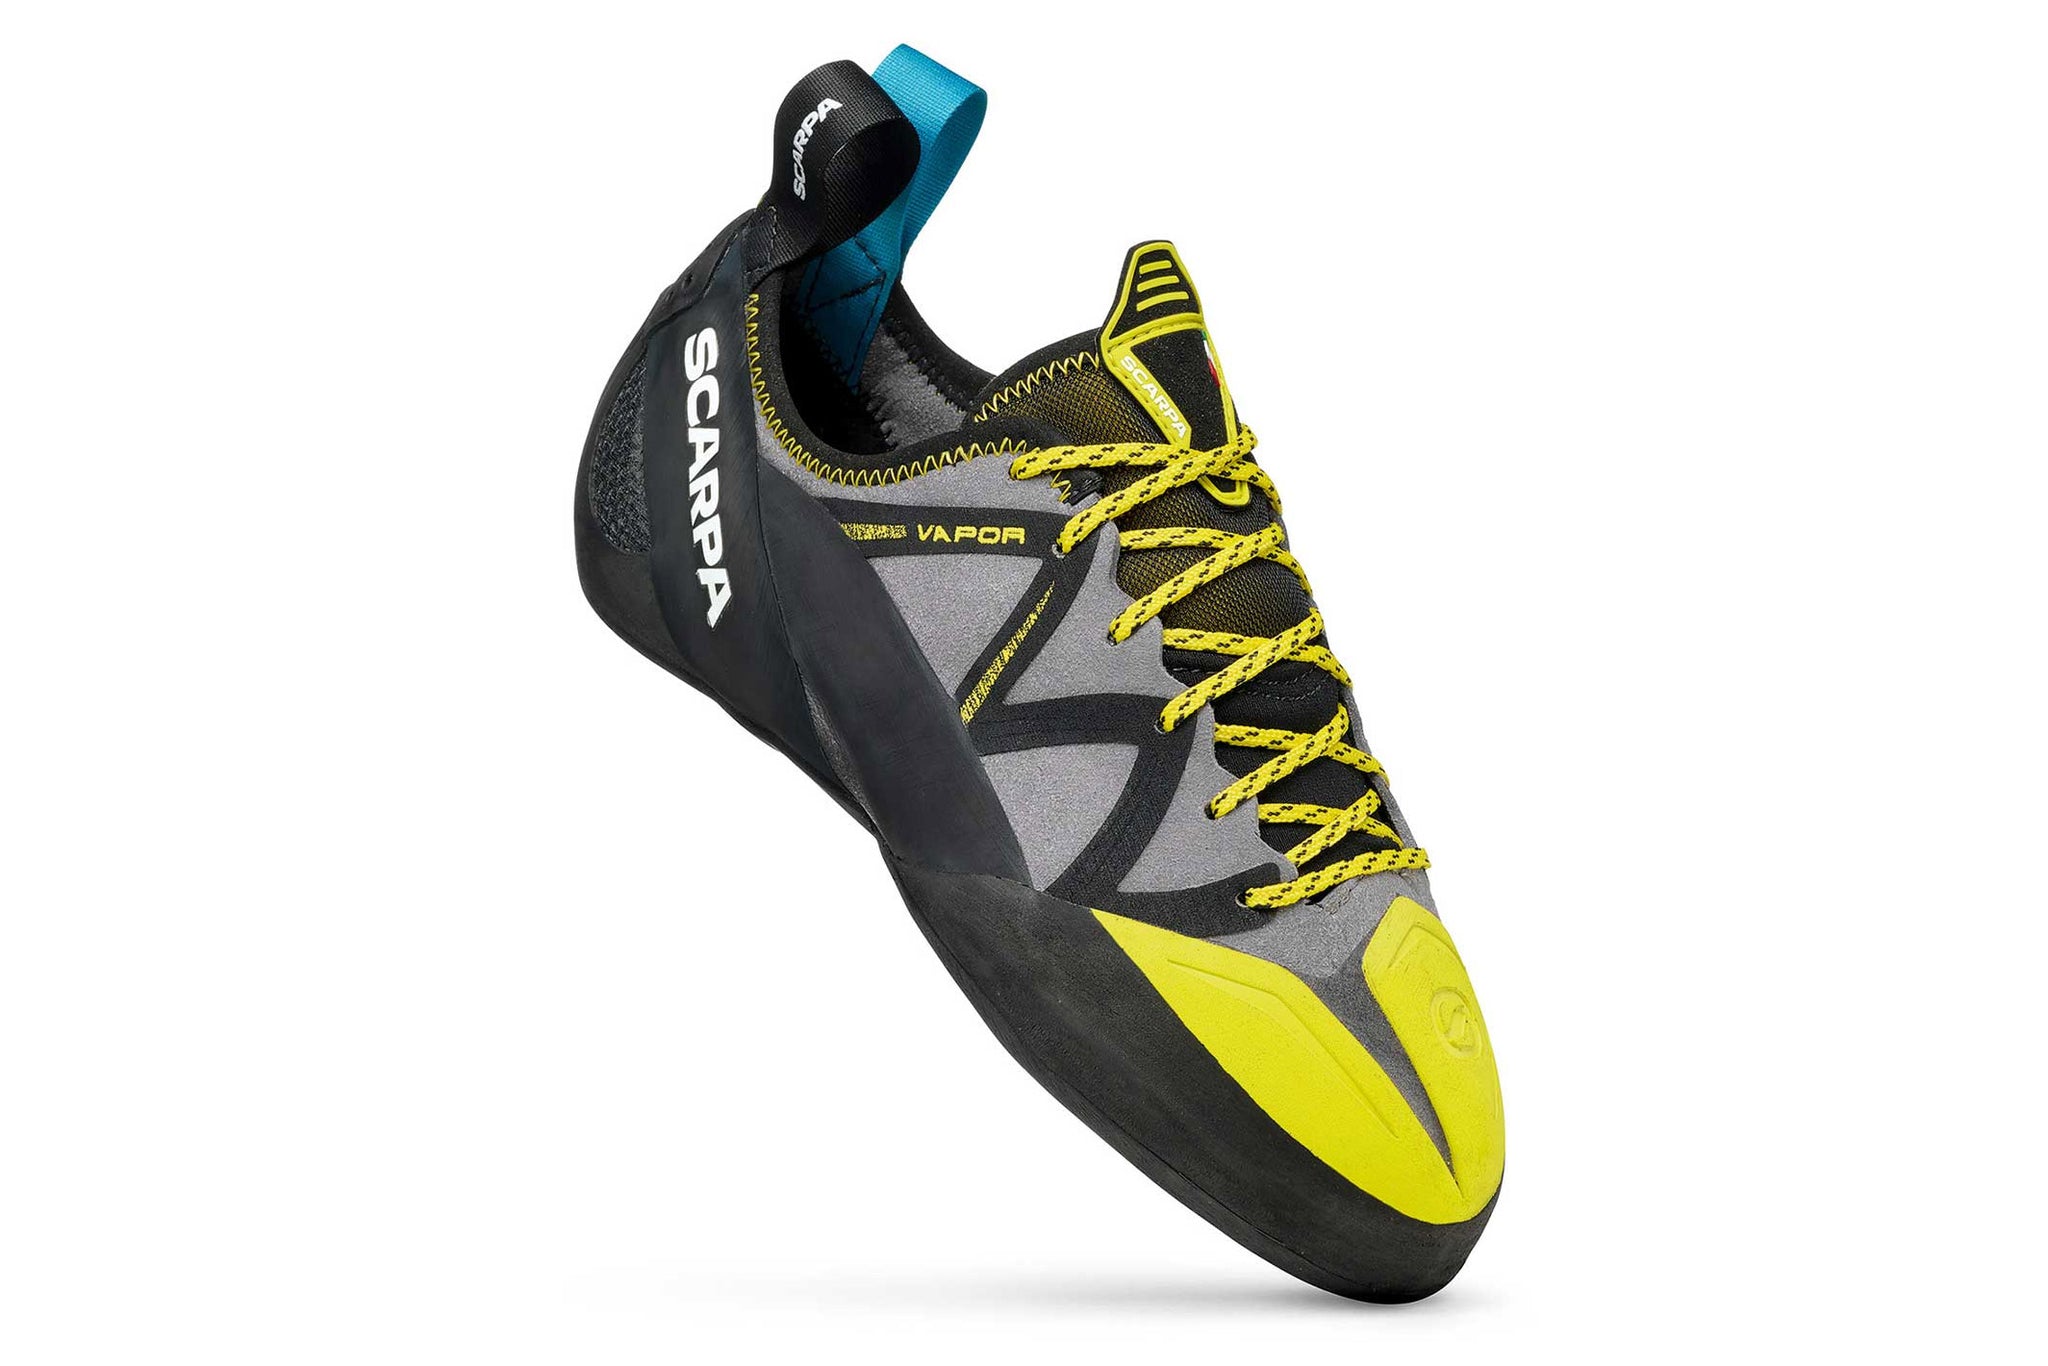 SCARPA Vapor Lace-Up Review: A Whole Lotta Trad With a Dash of Sport